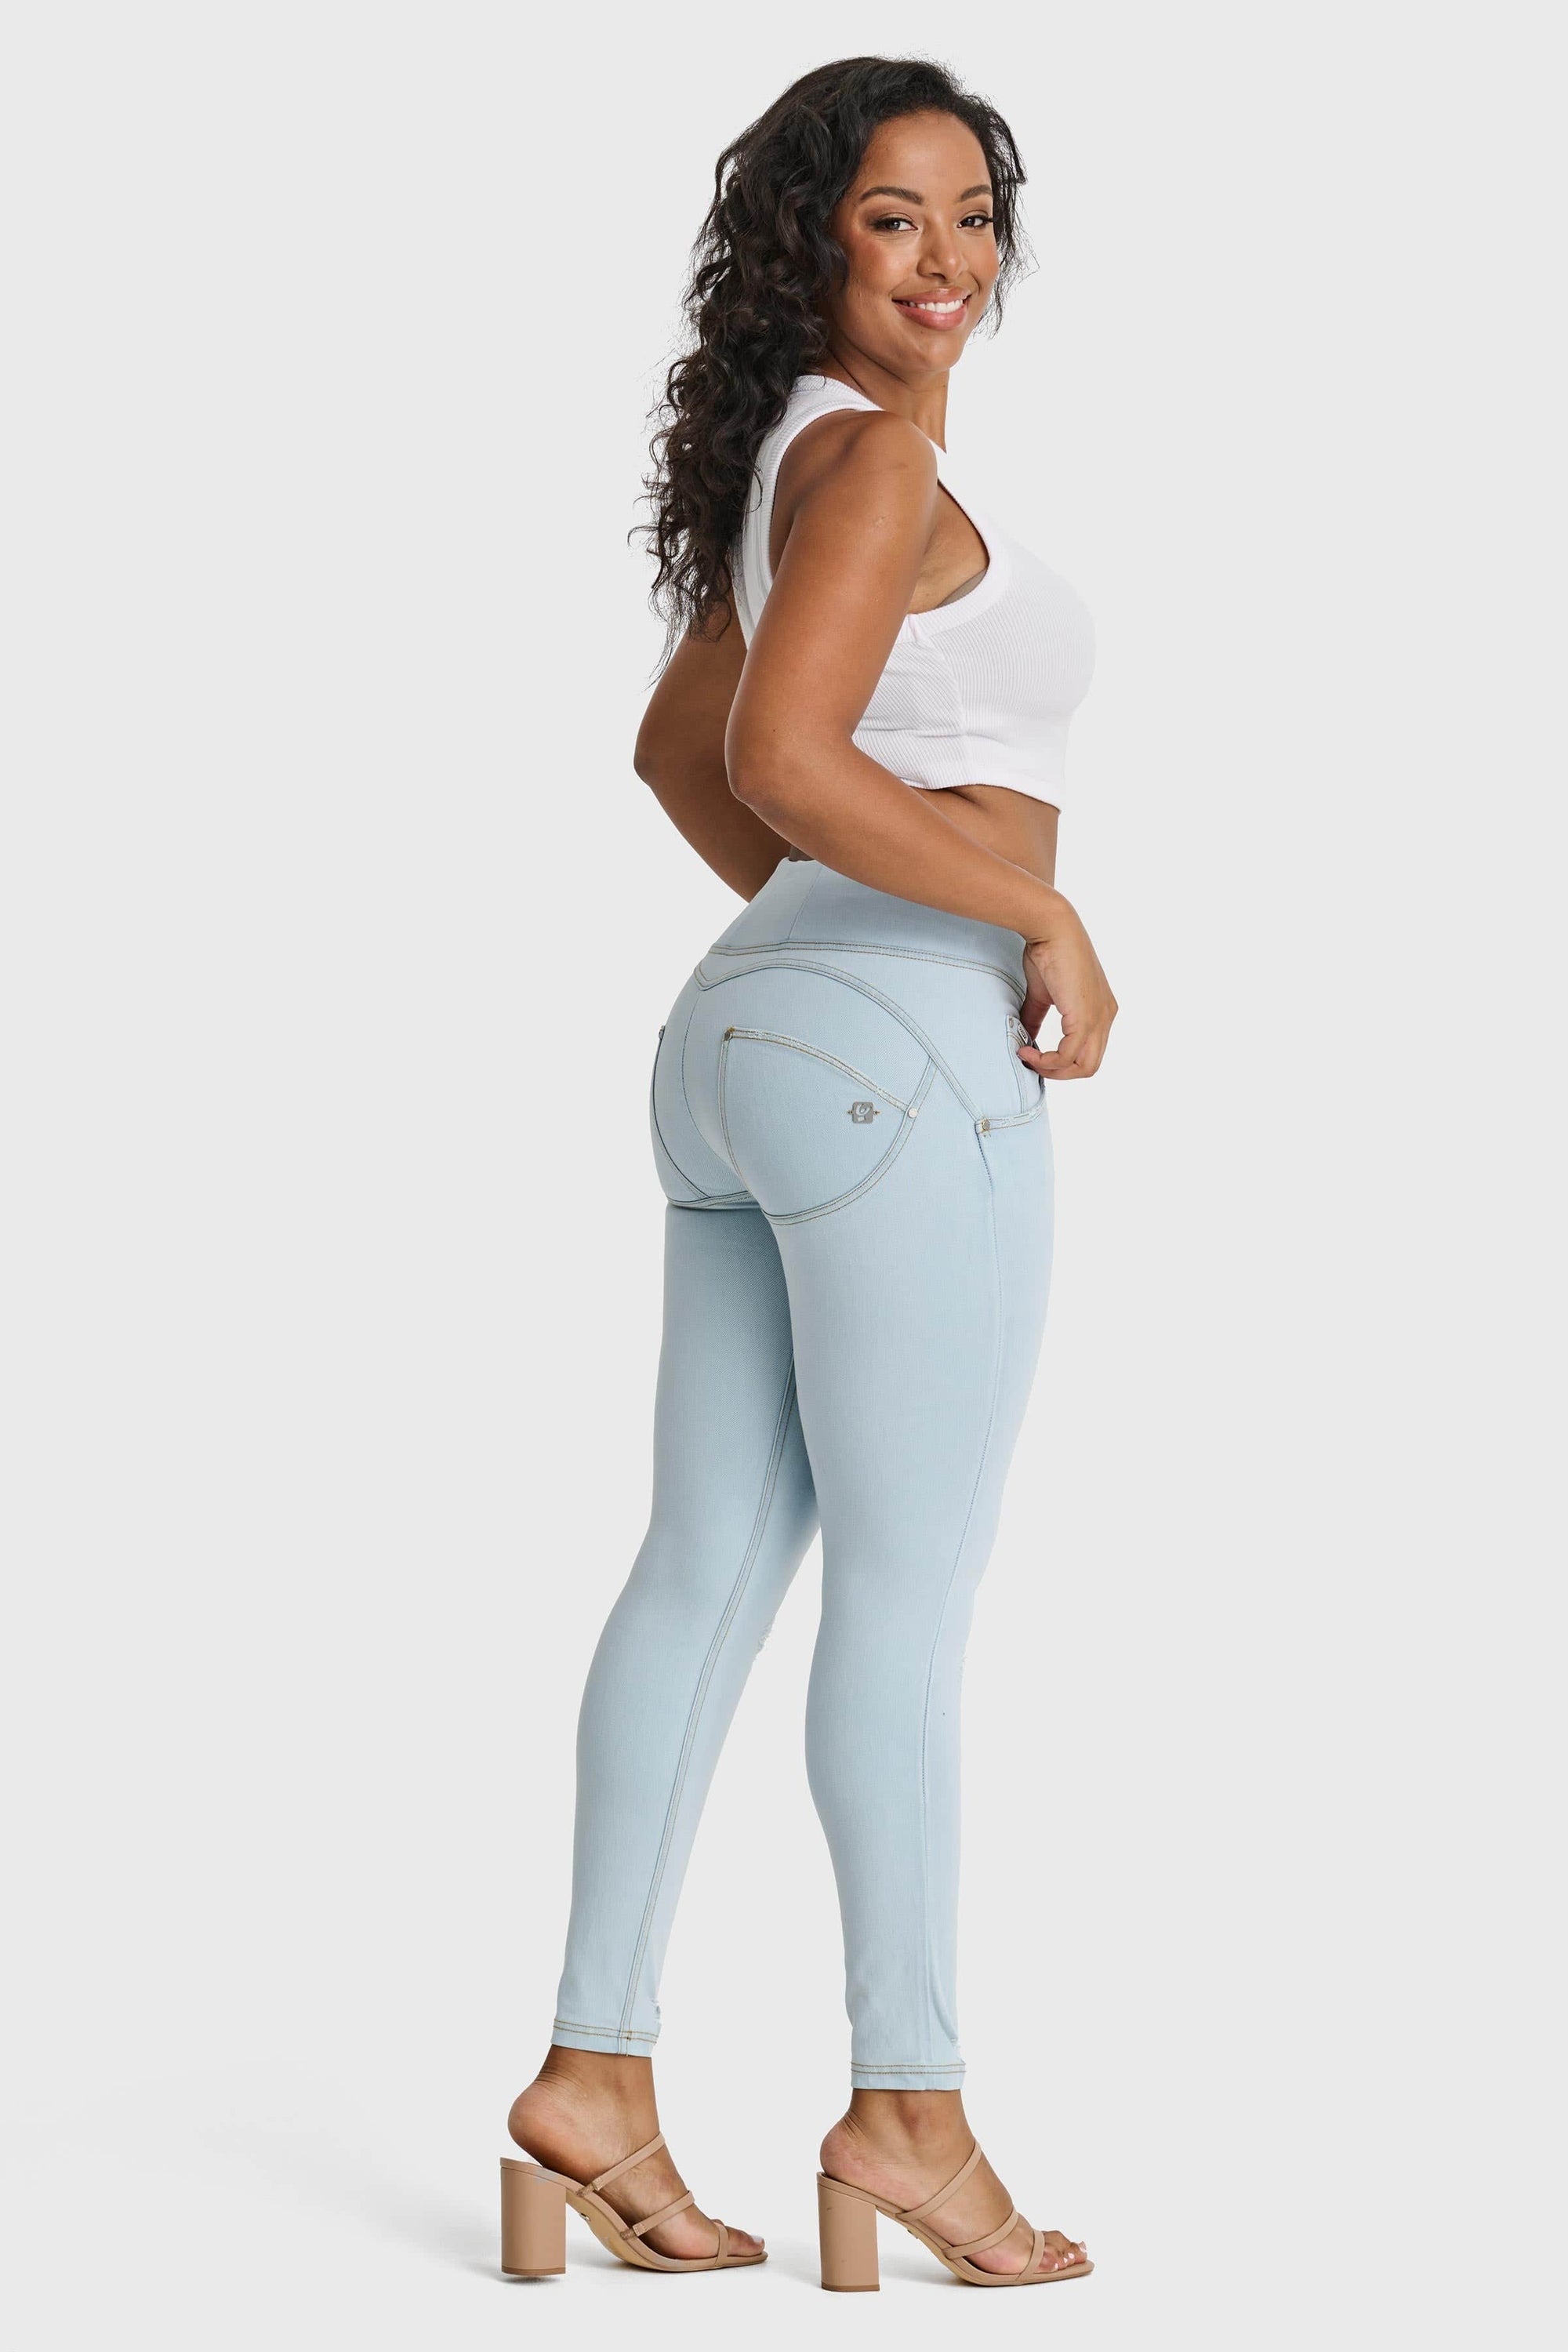 WR.UP® Snug Distressed Jeans - High Waisted - Full Length - Baby Blue + Yellow Stitching 6